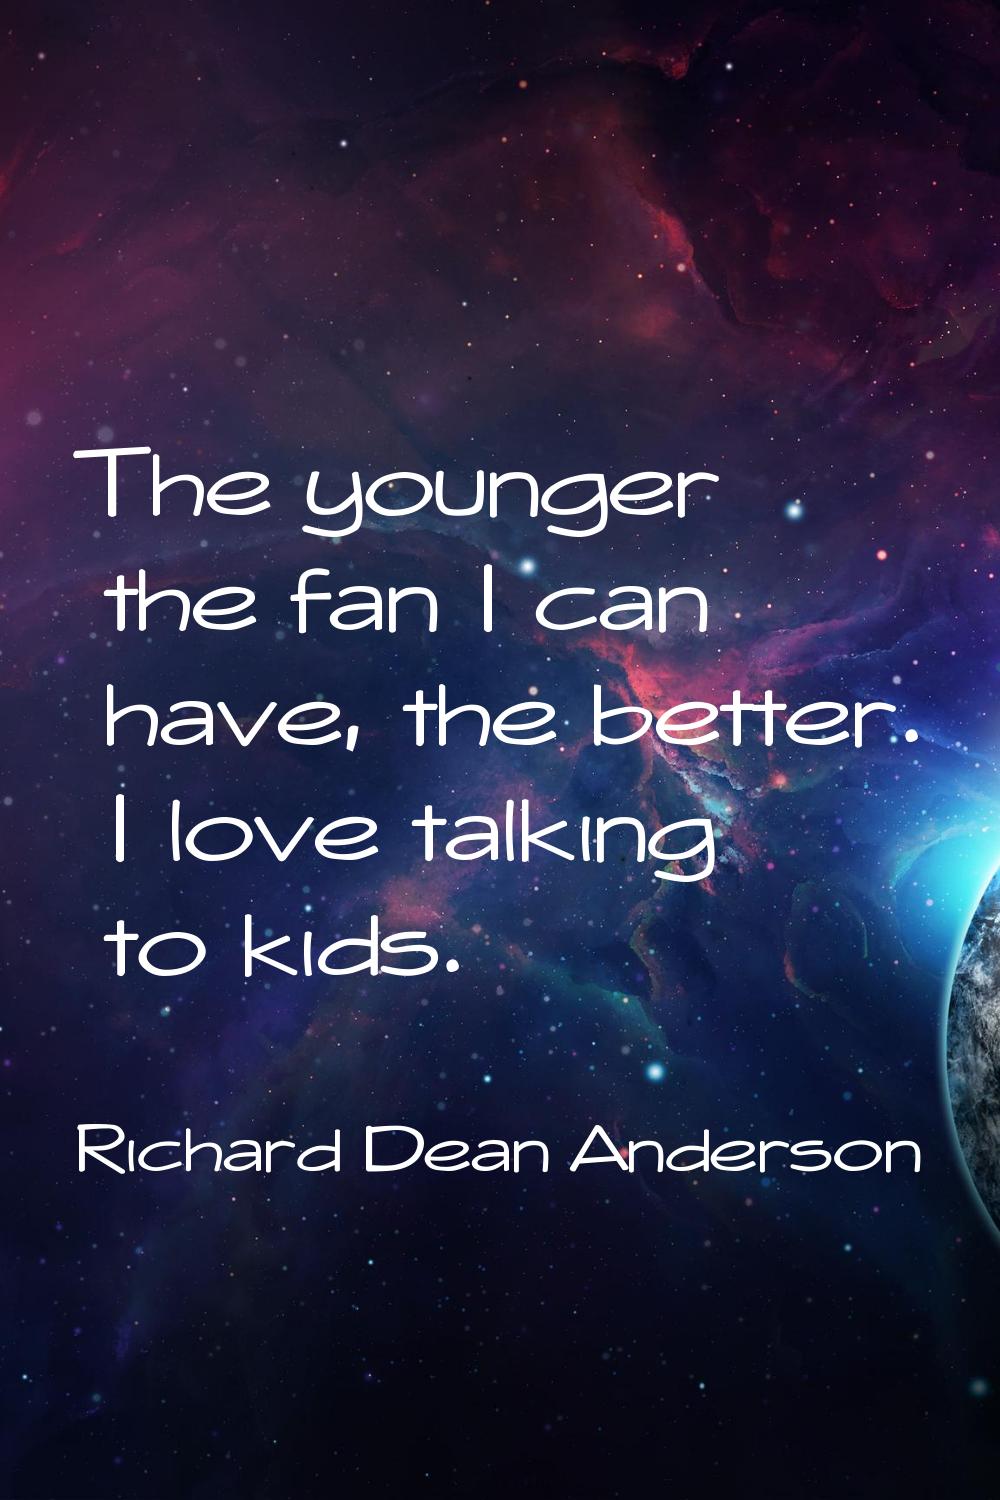 The younger the fan I can have, the better. I love talking to kids.